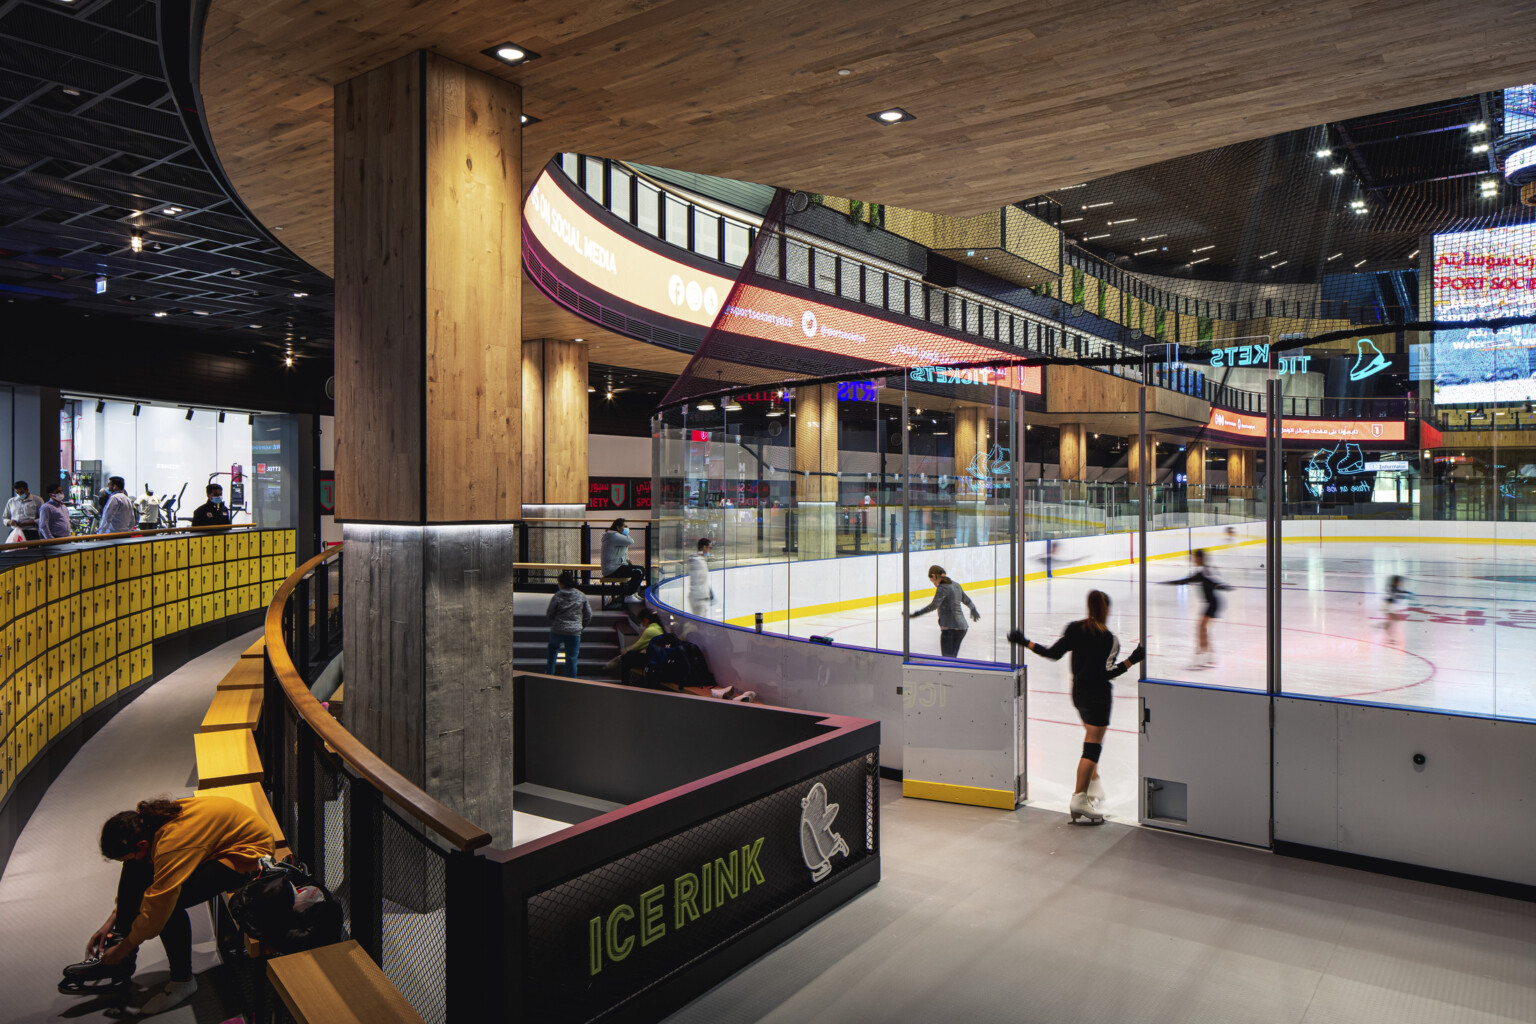 Indoor year-round ice rink in triple-height atrium, glass partitions, seating for watching and changing gear